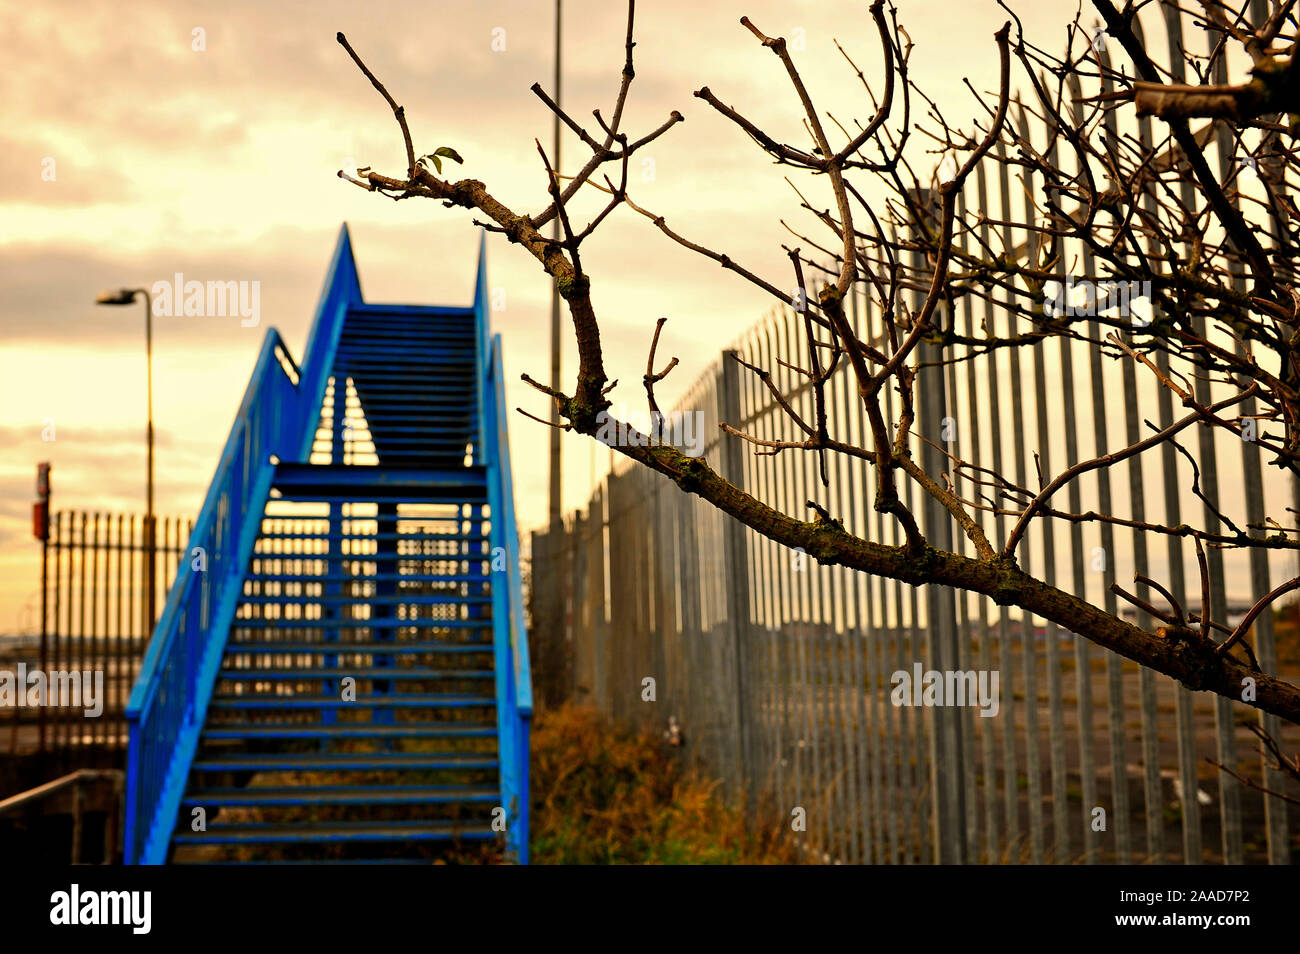 Gnarled tree branches in winter against metal footbridge painted blue against threatening sky Stock Photo